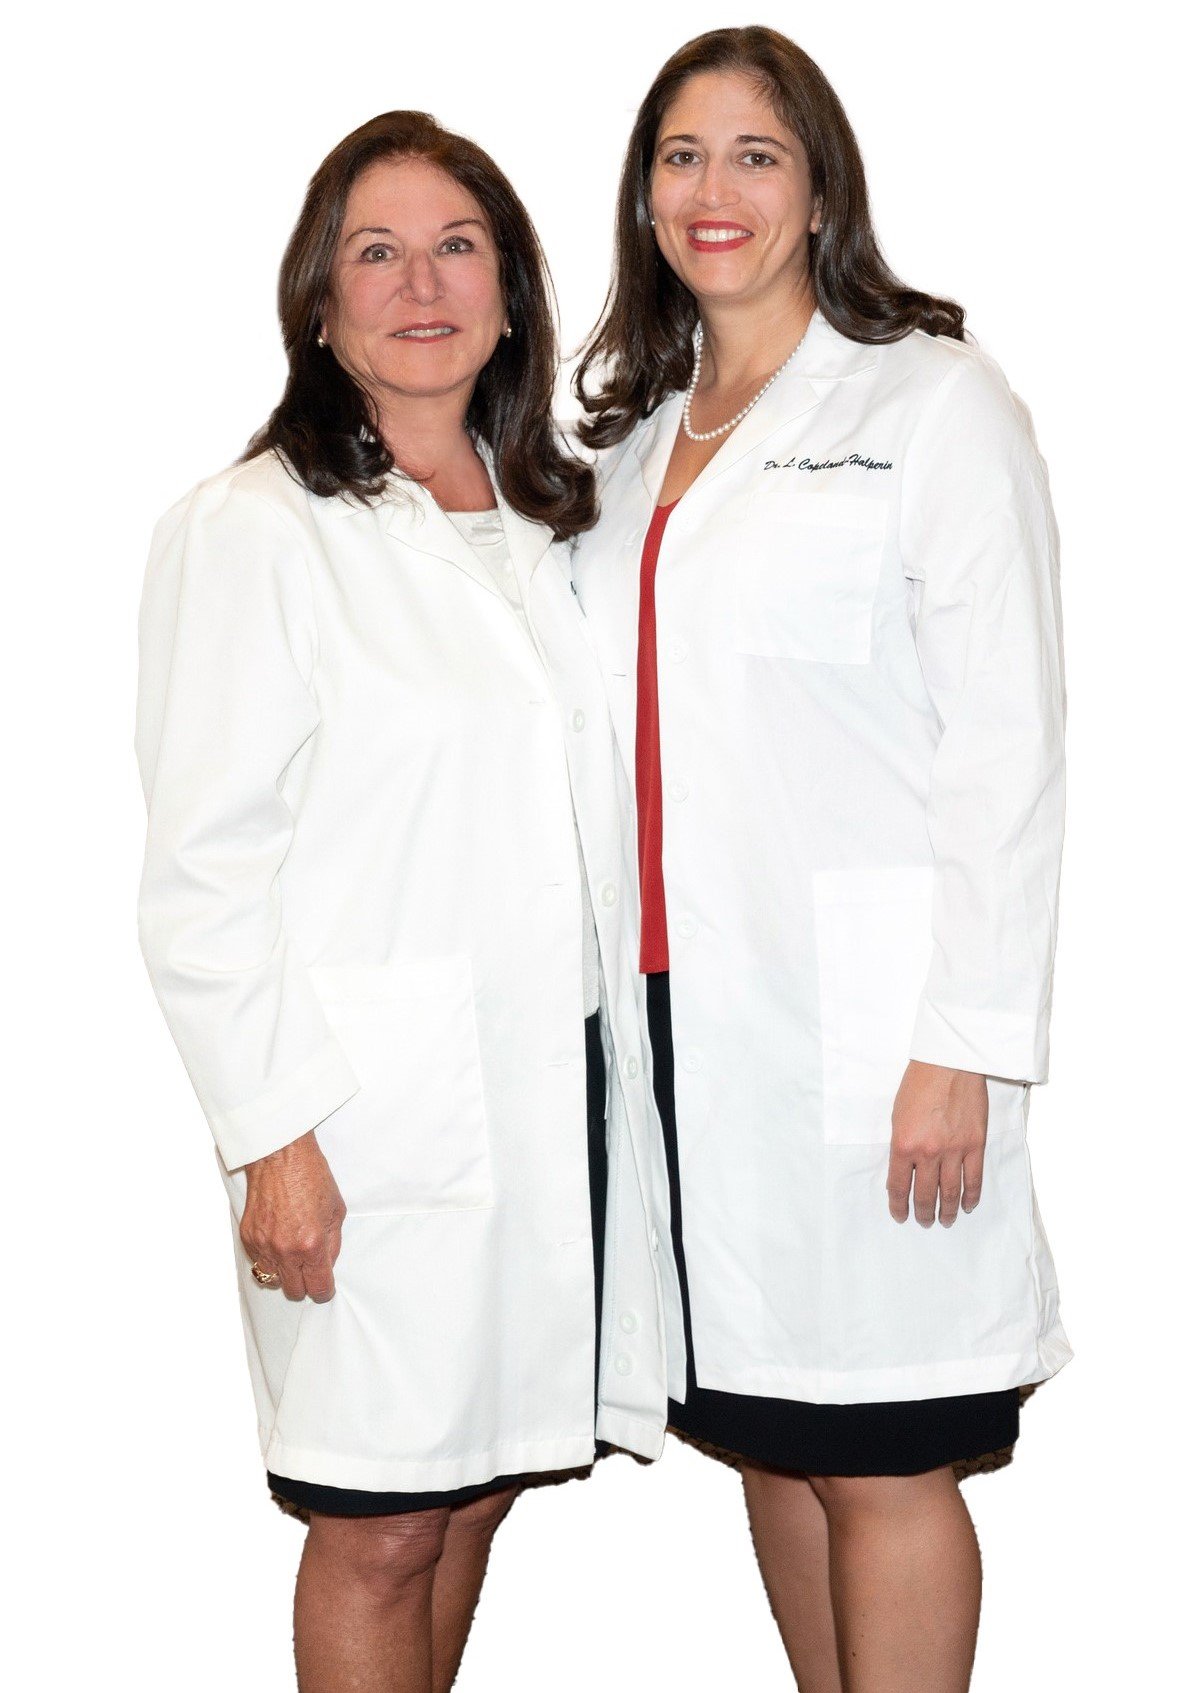 Dr. Michelle Copeland and Dr. Libby Copeland